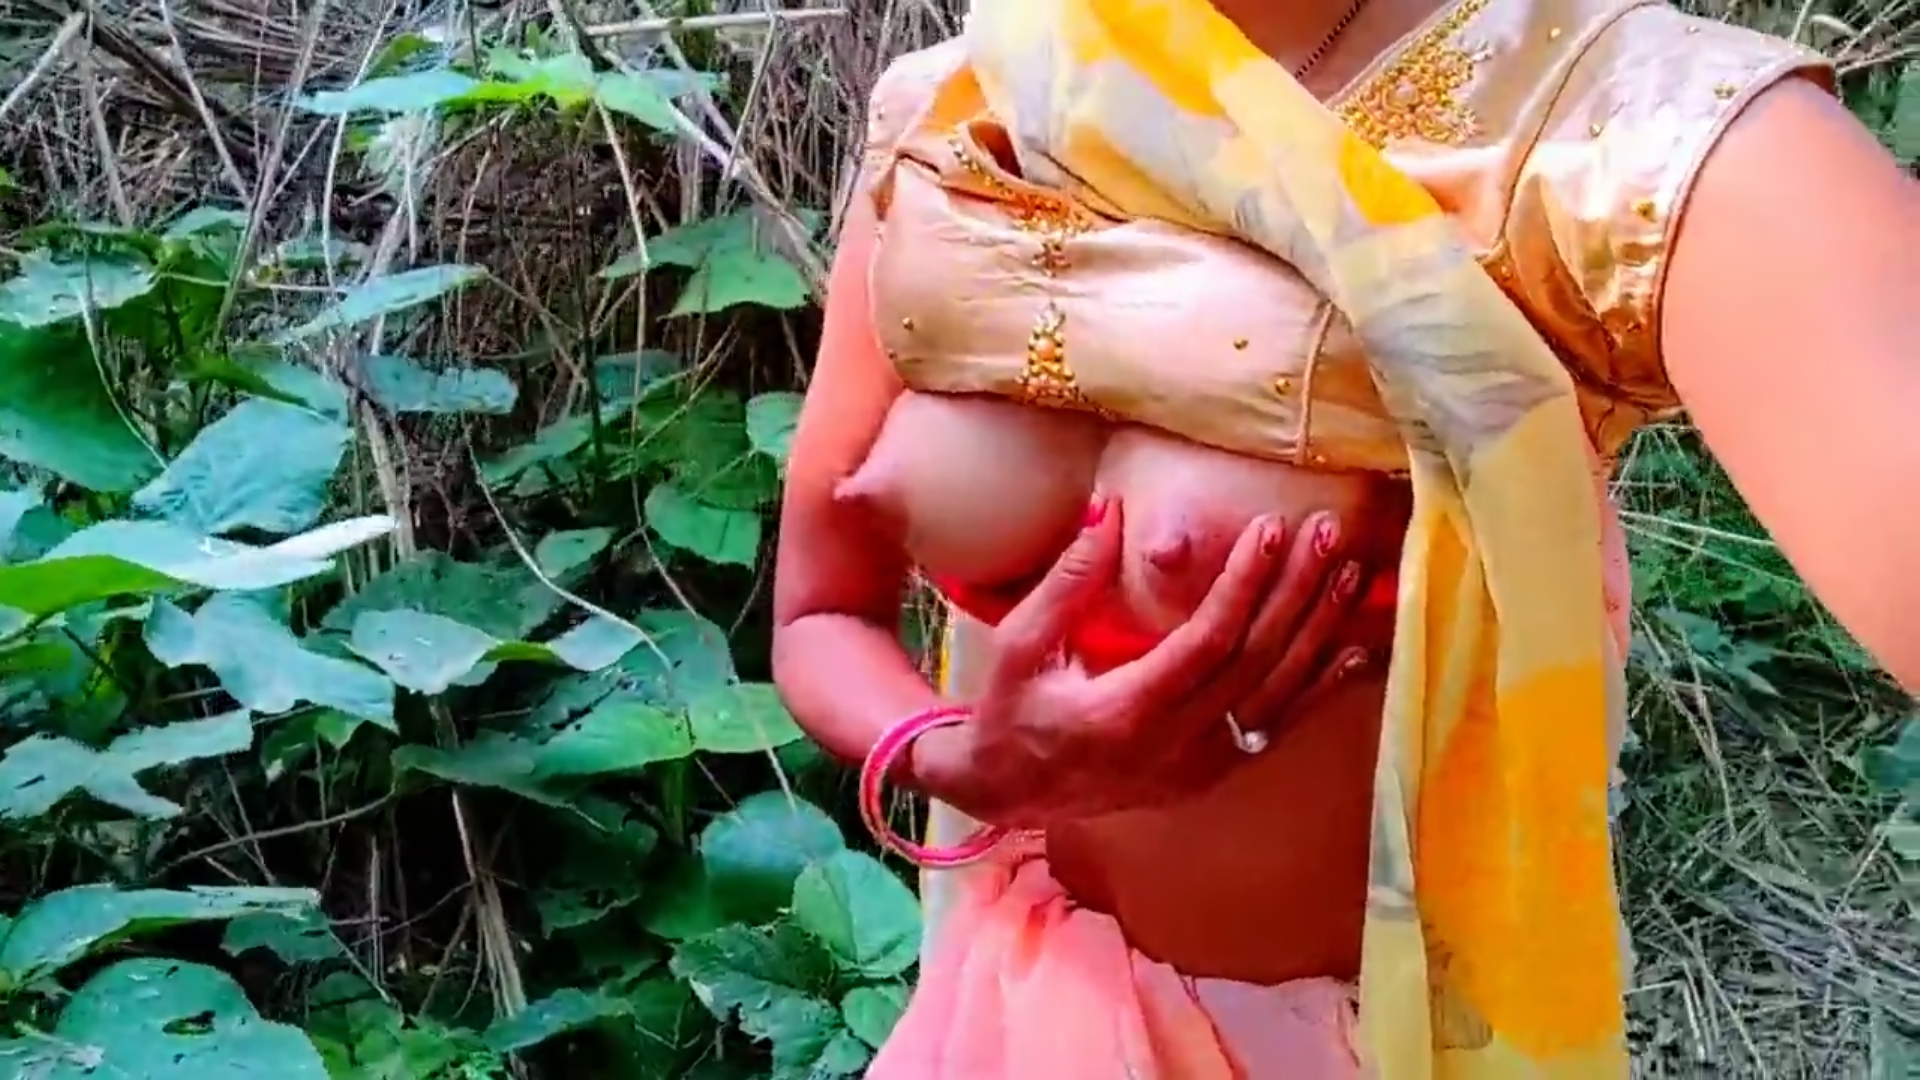 Deshi Hot Villegexxx - Sexy Desi aunt showing her nude tits and body in jungle, Indian XXX sex |  AREA51.PORN